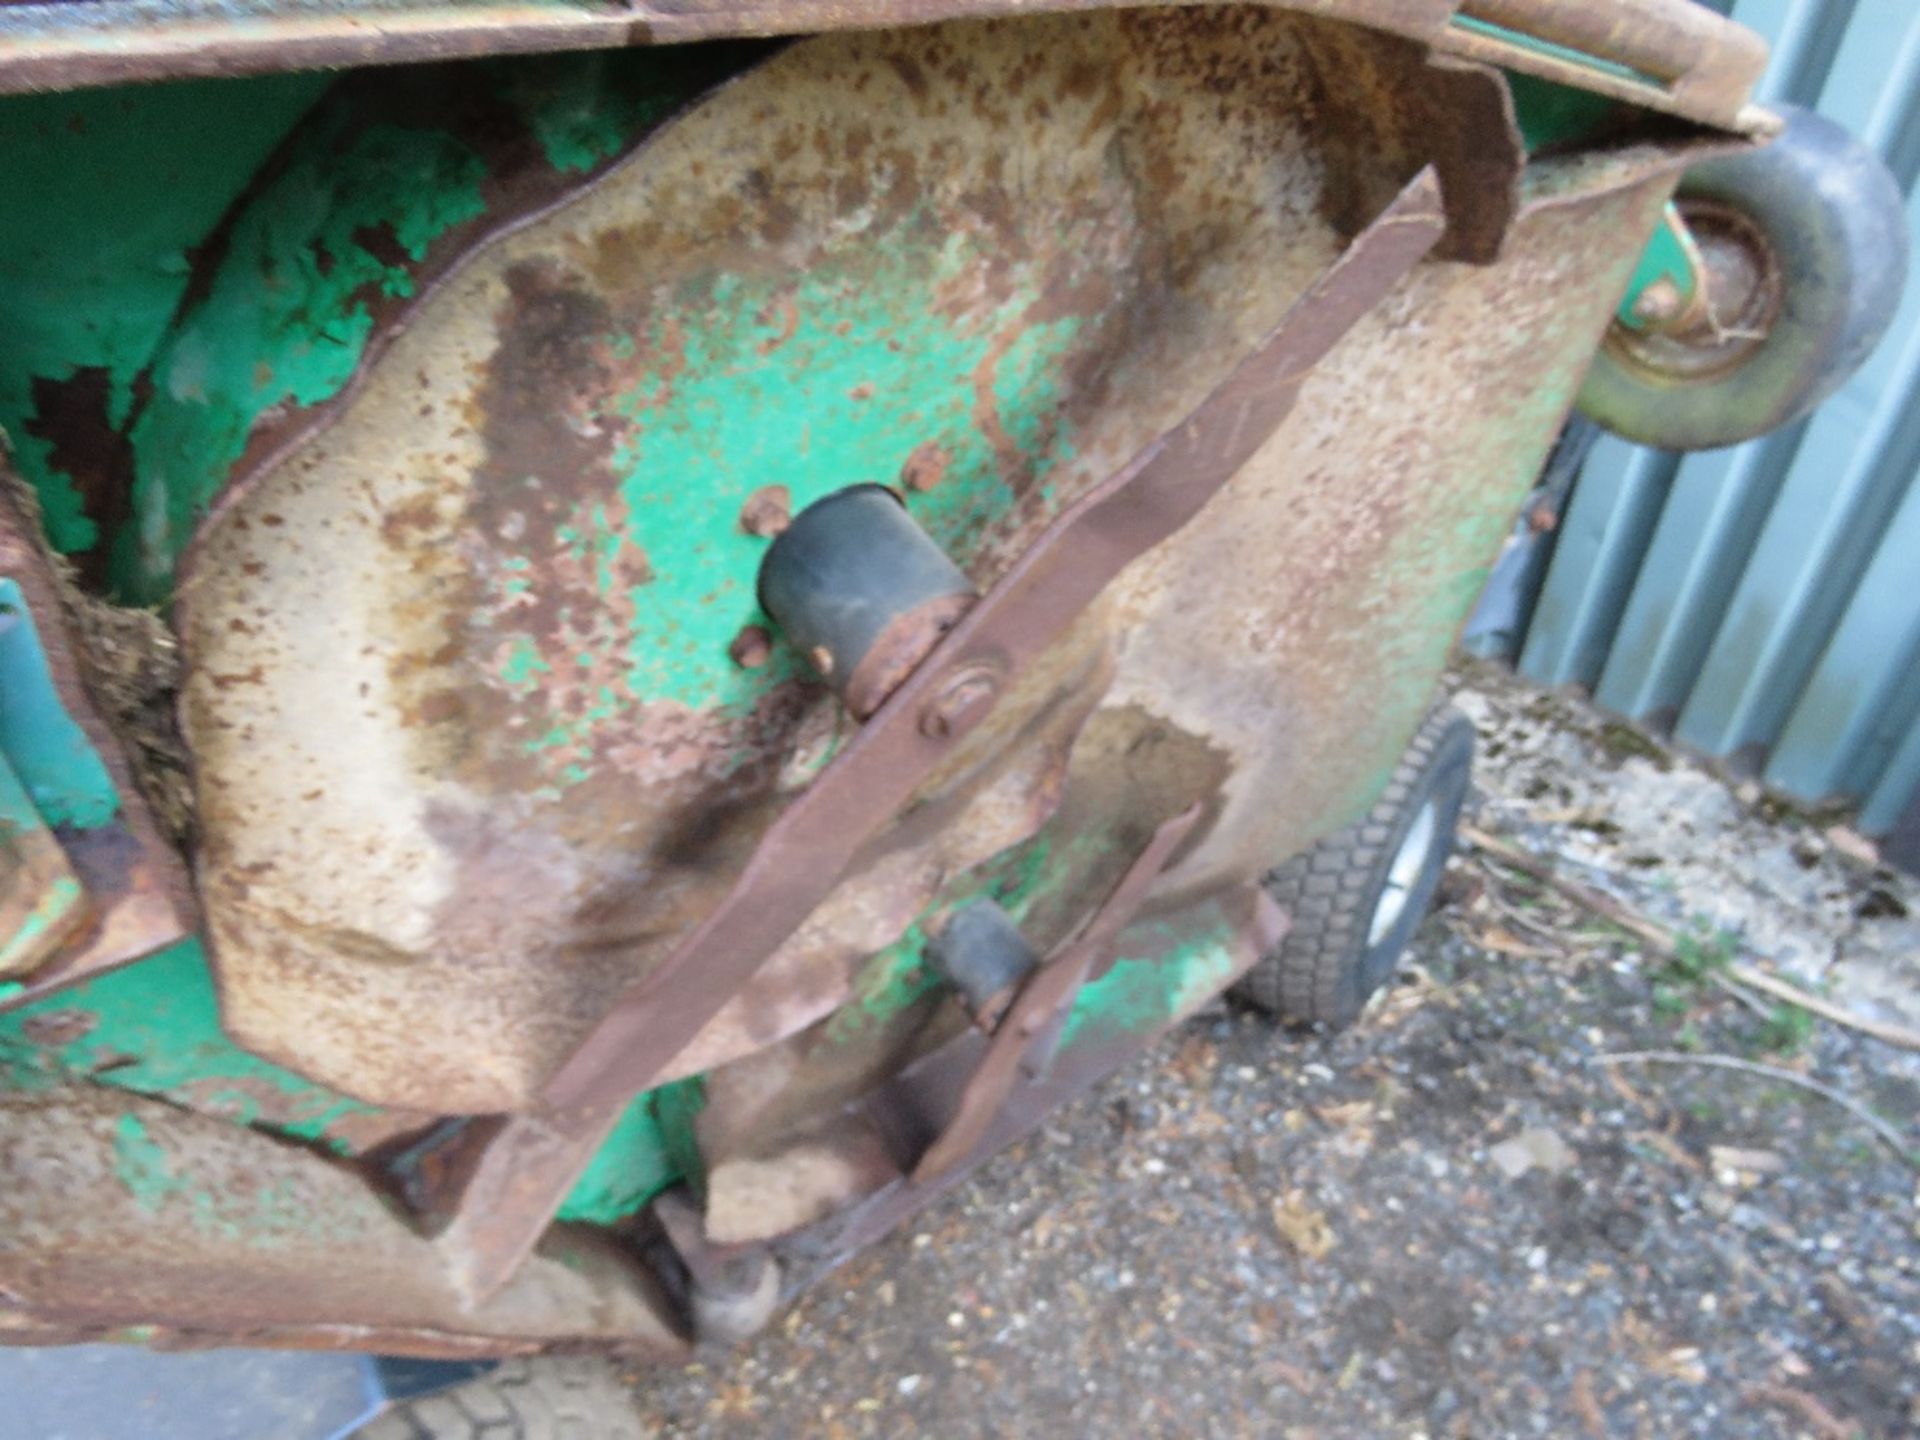 RANSOMES HR6010RAN BATWING MOWER REG:DX09 LTZ (LOG BOOK TO APPLY FOR) 3403 REC HRS. WHEN TESTED WA - Image 10 of 12